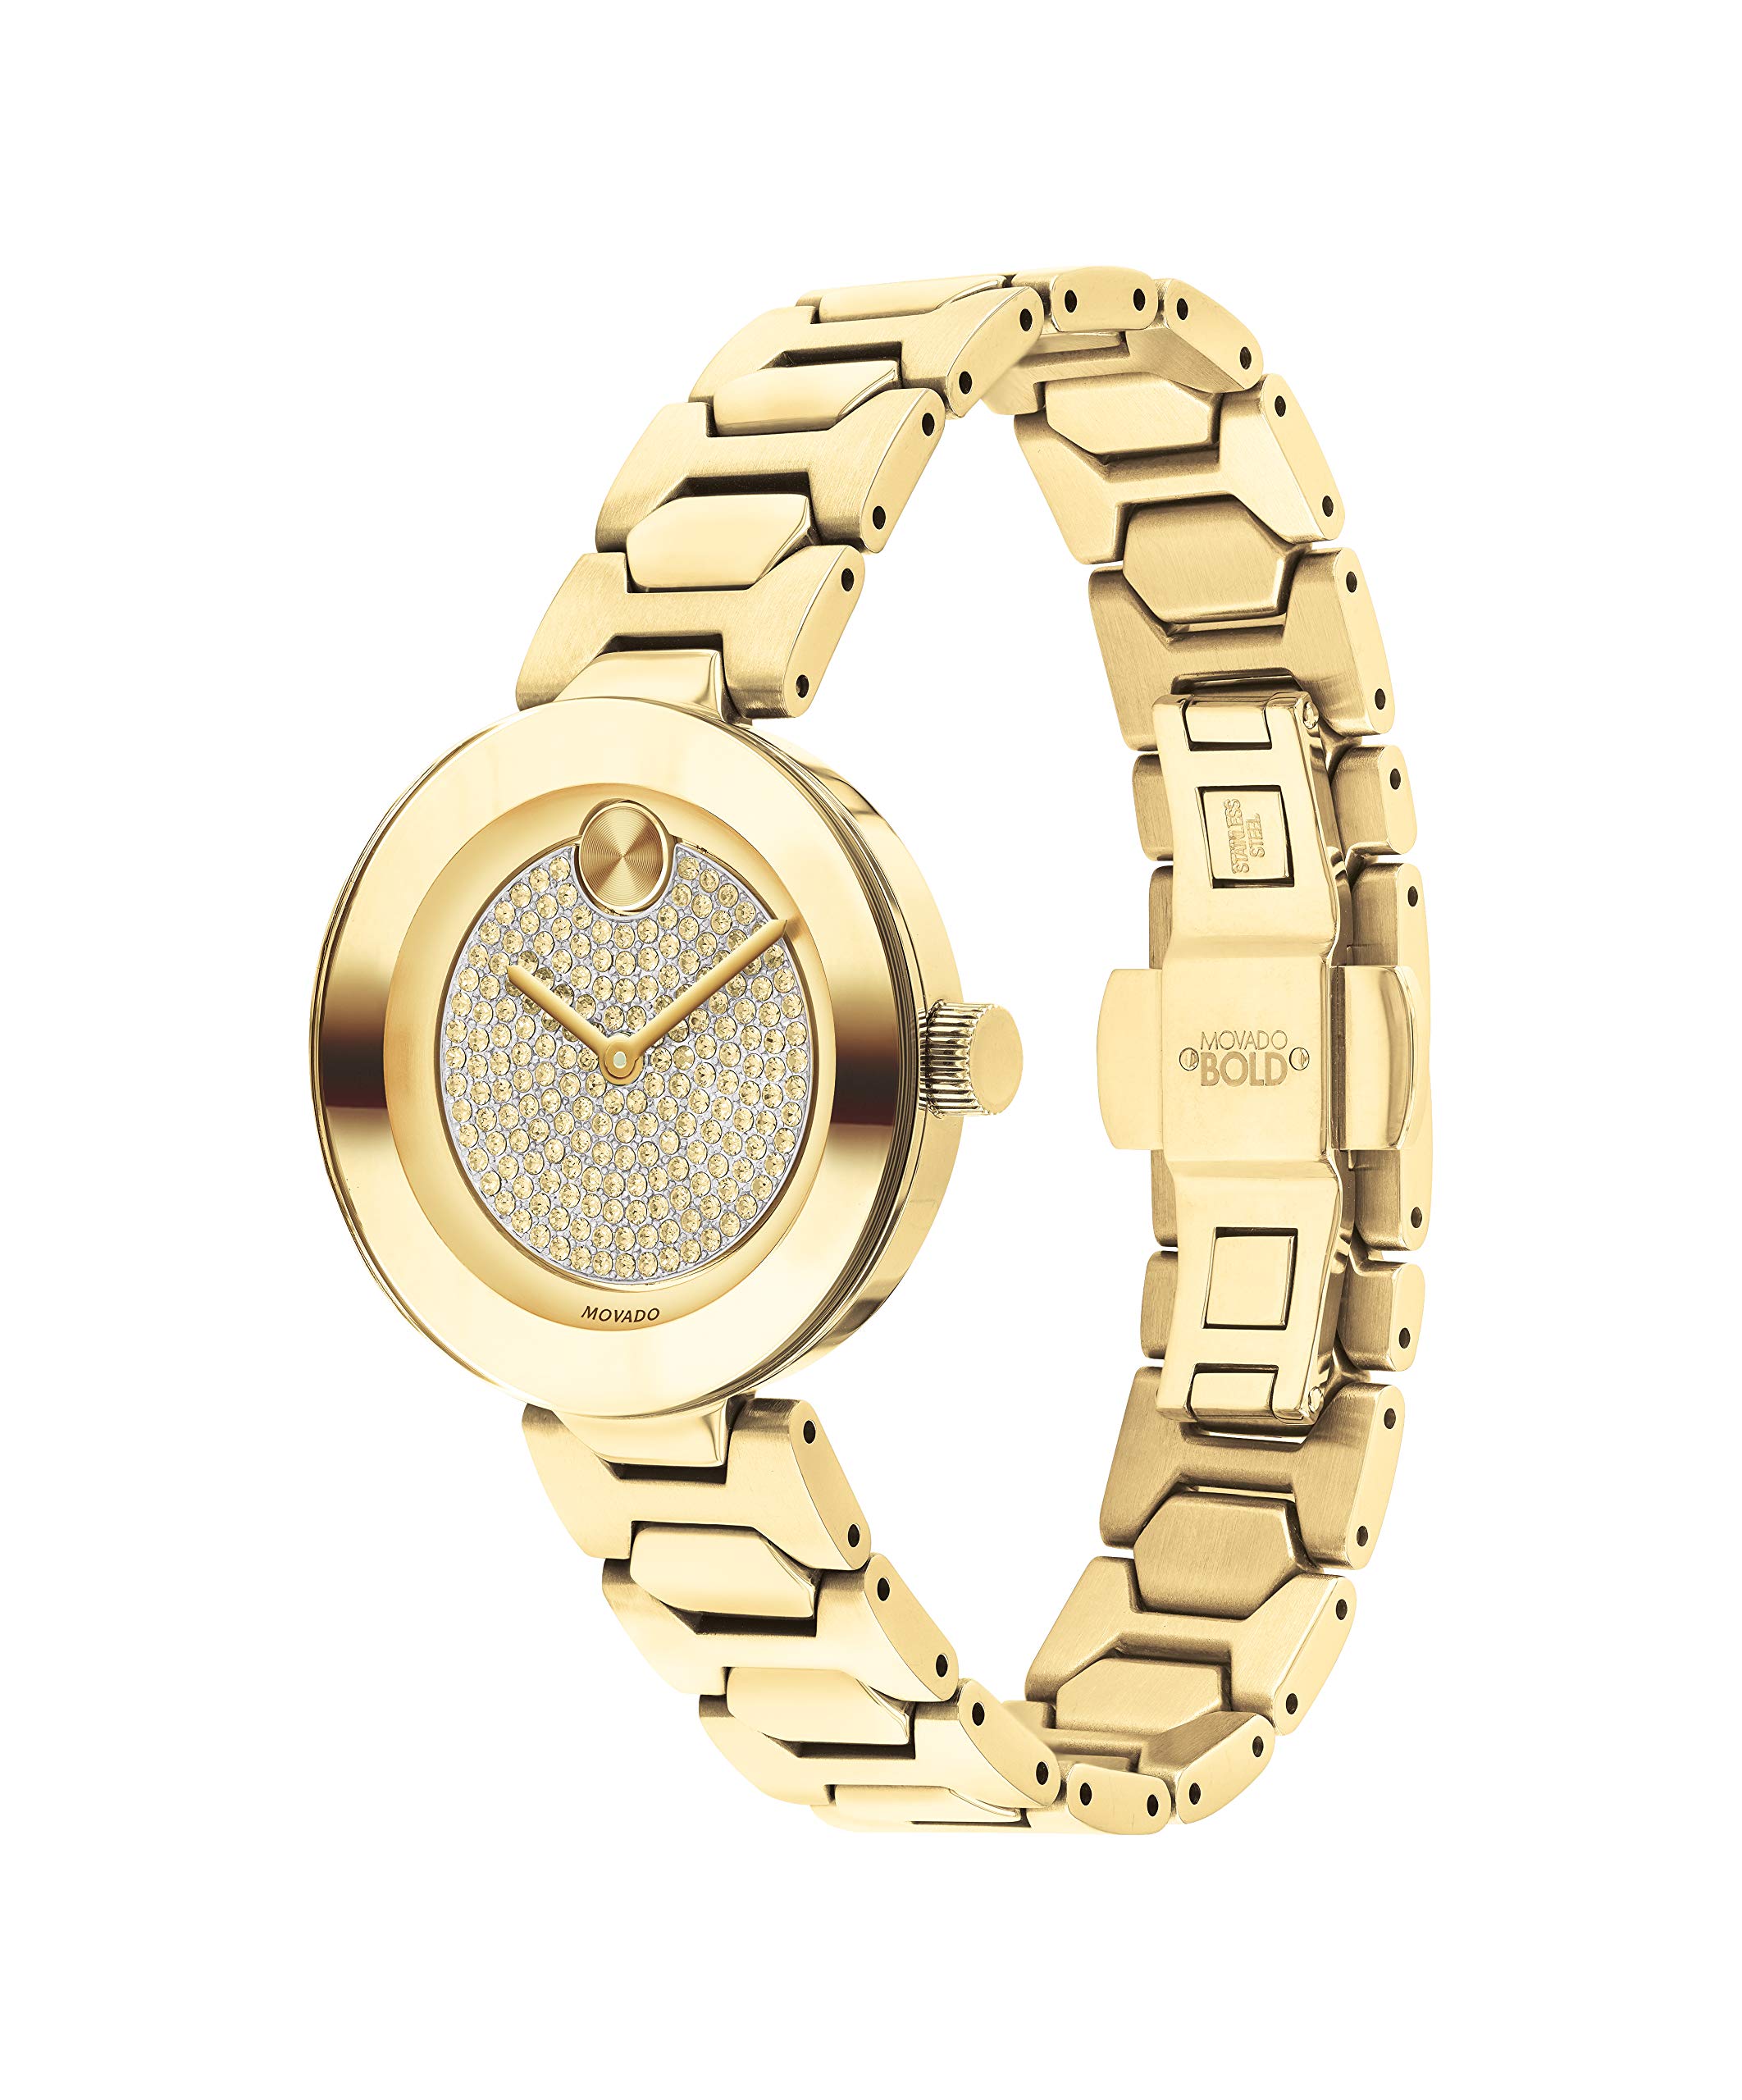 Movado Women's BOLD T-Bar LYG Watch with a Flat Dot Crystal Dial, Gold (Model 3600492)